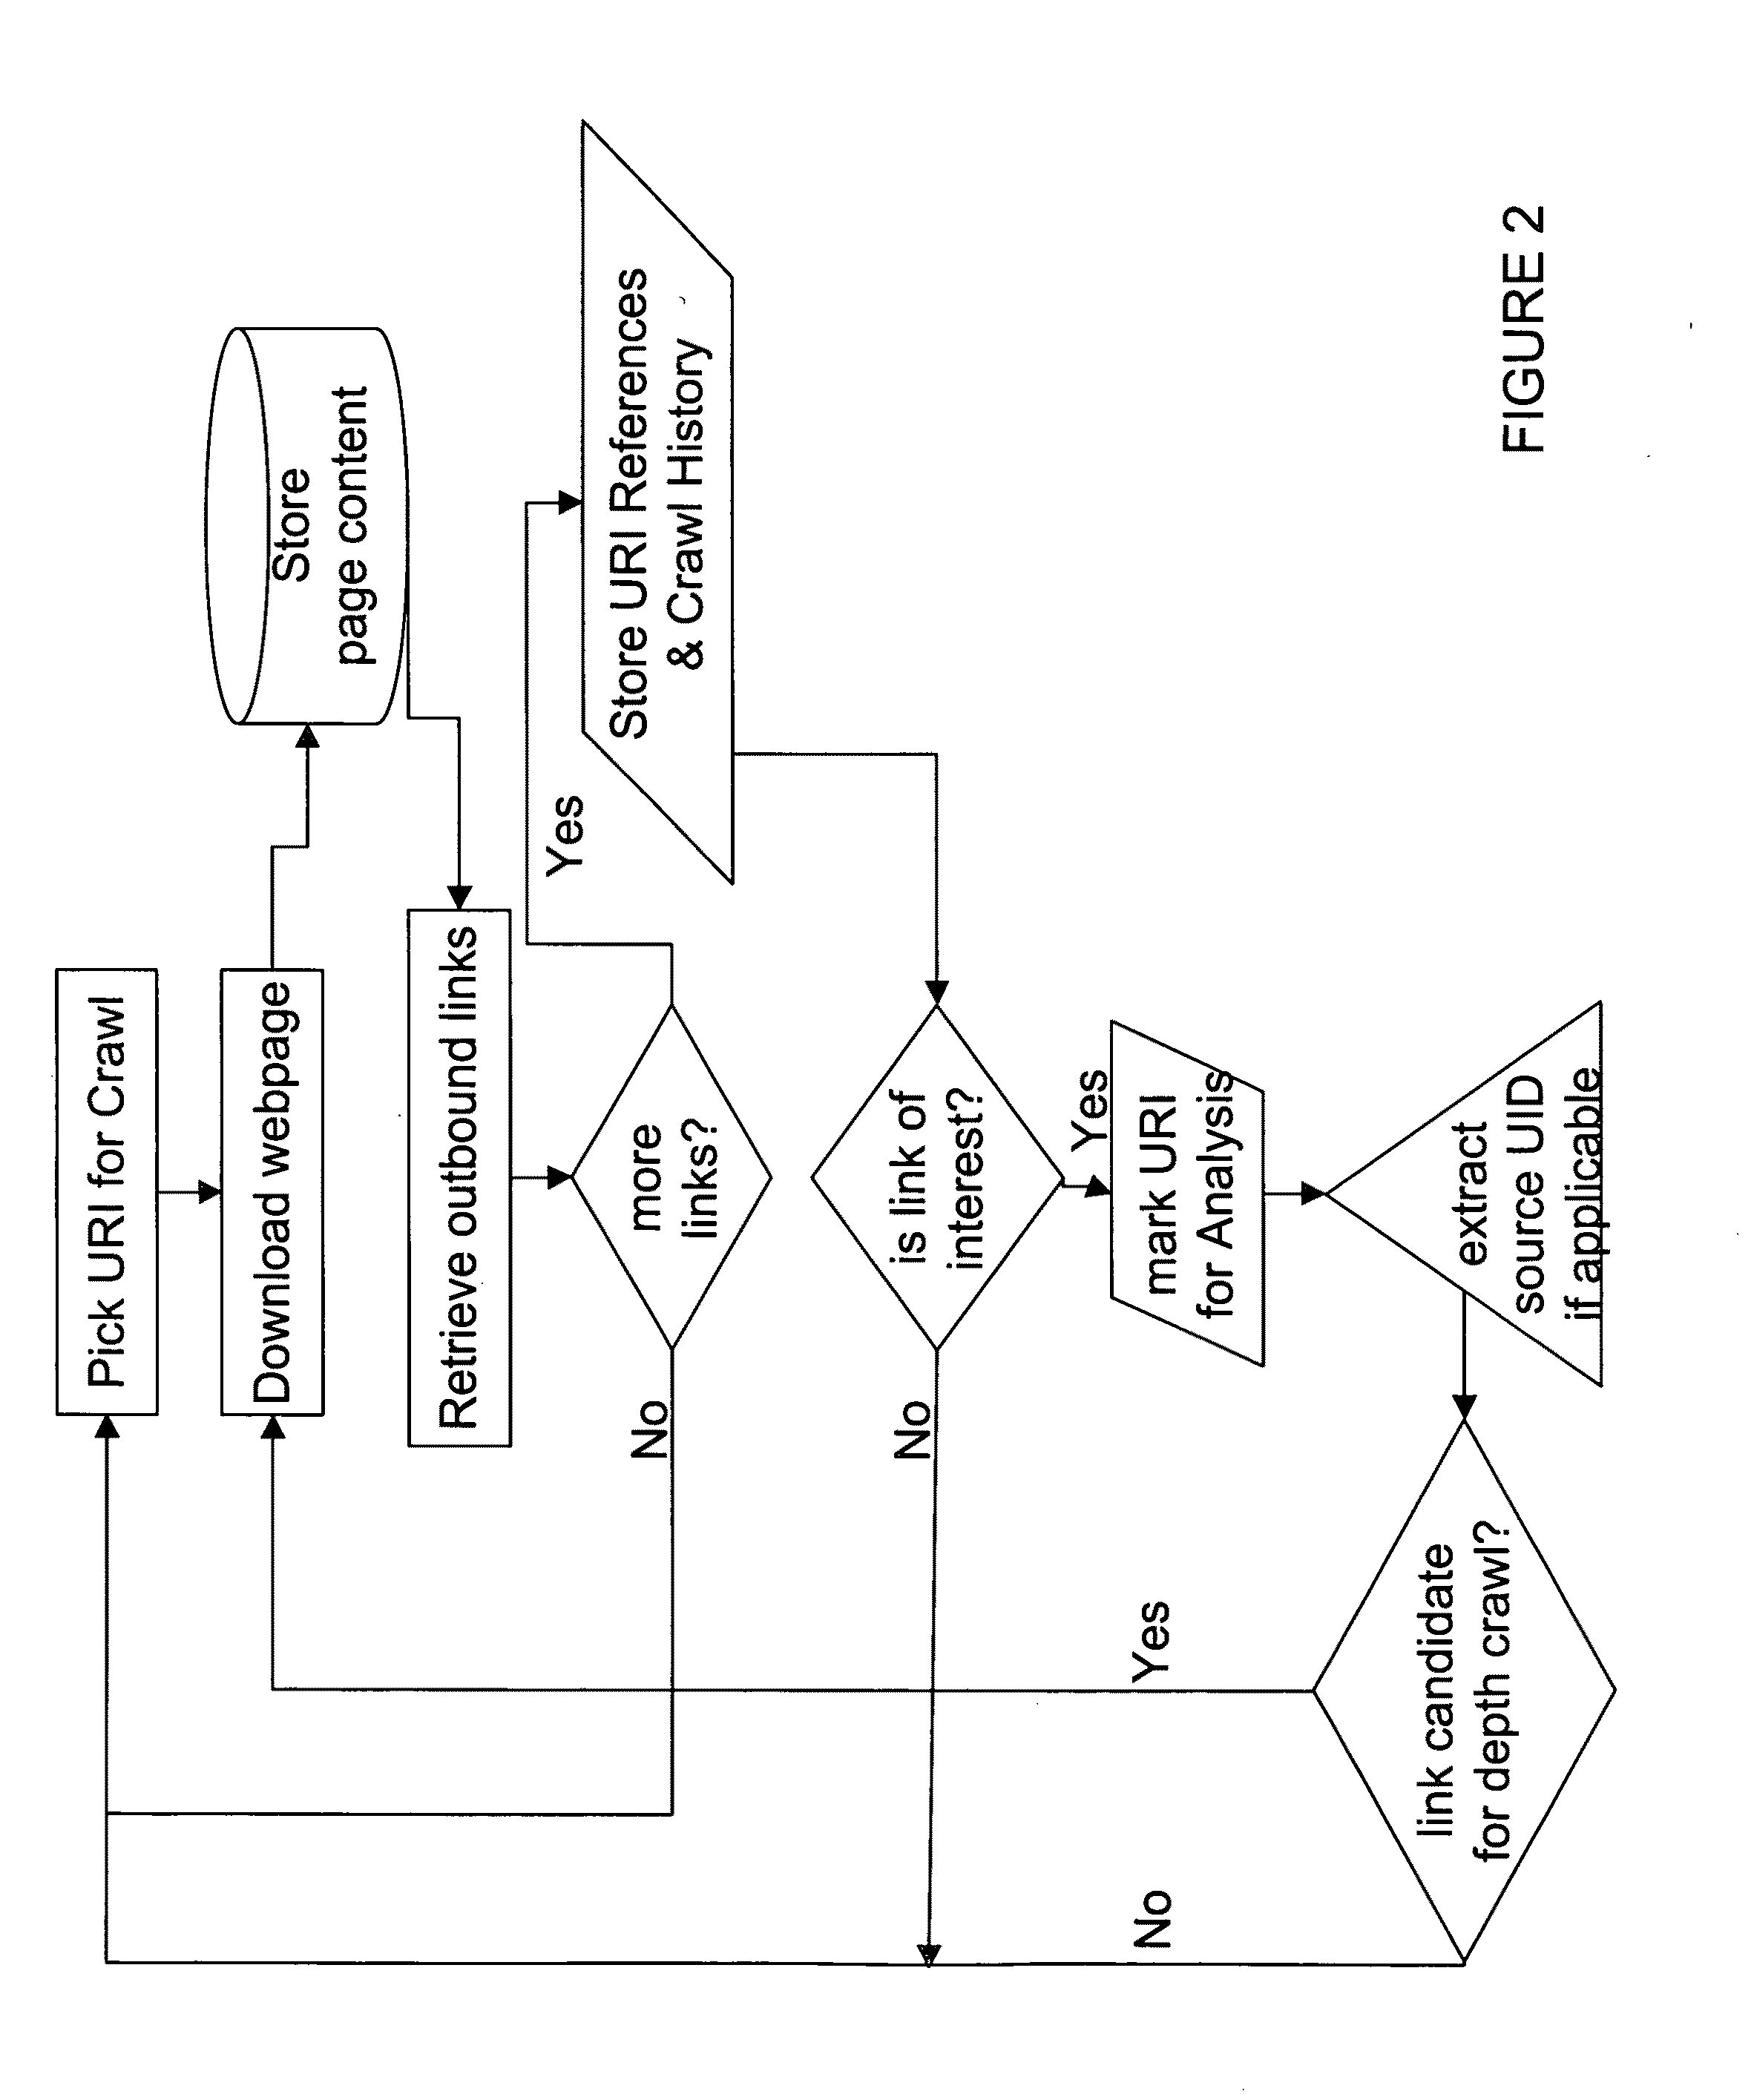 Method and system for crawling, mapping and extracting information associated with a business using heuristic and semantic analysis